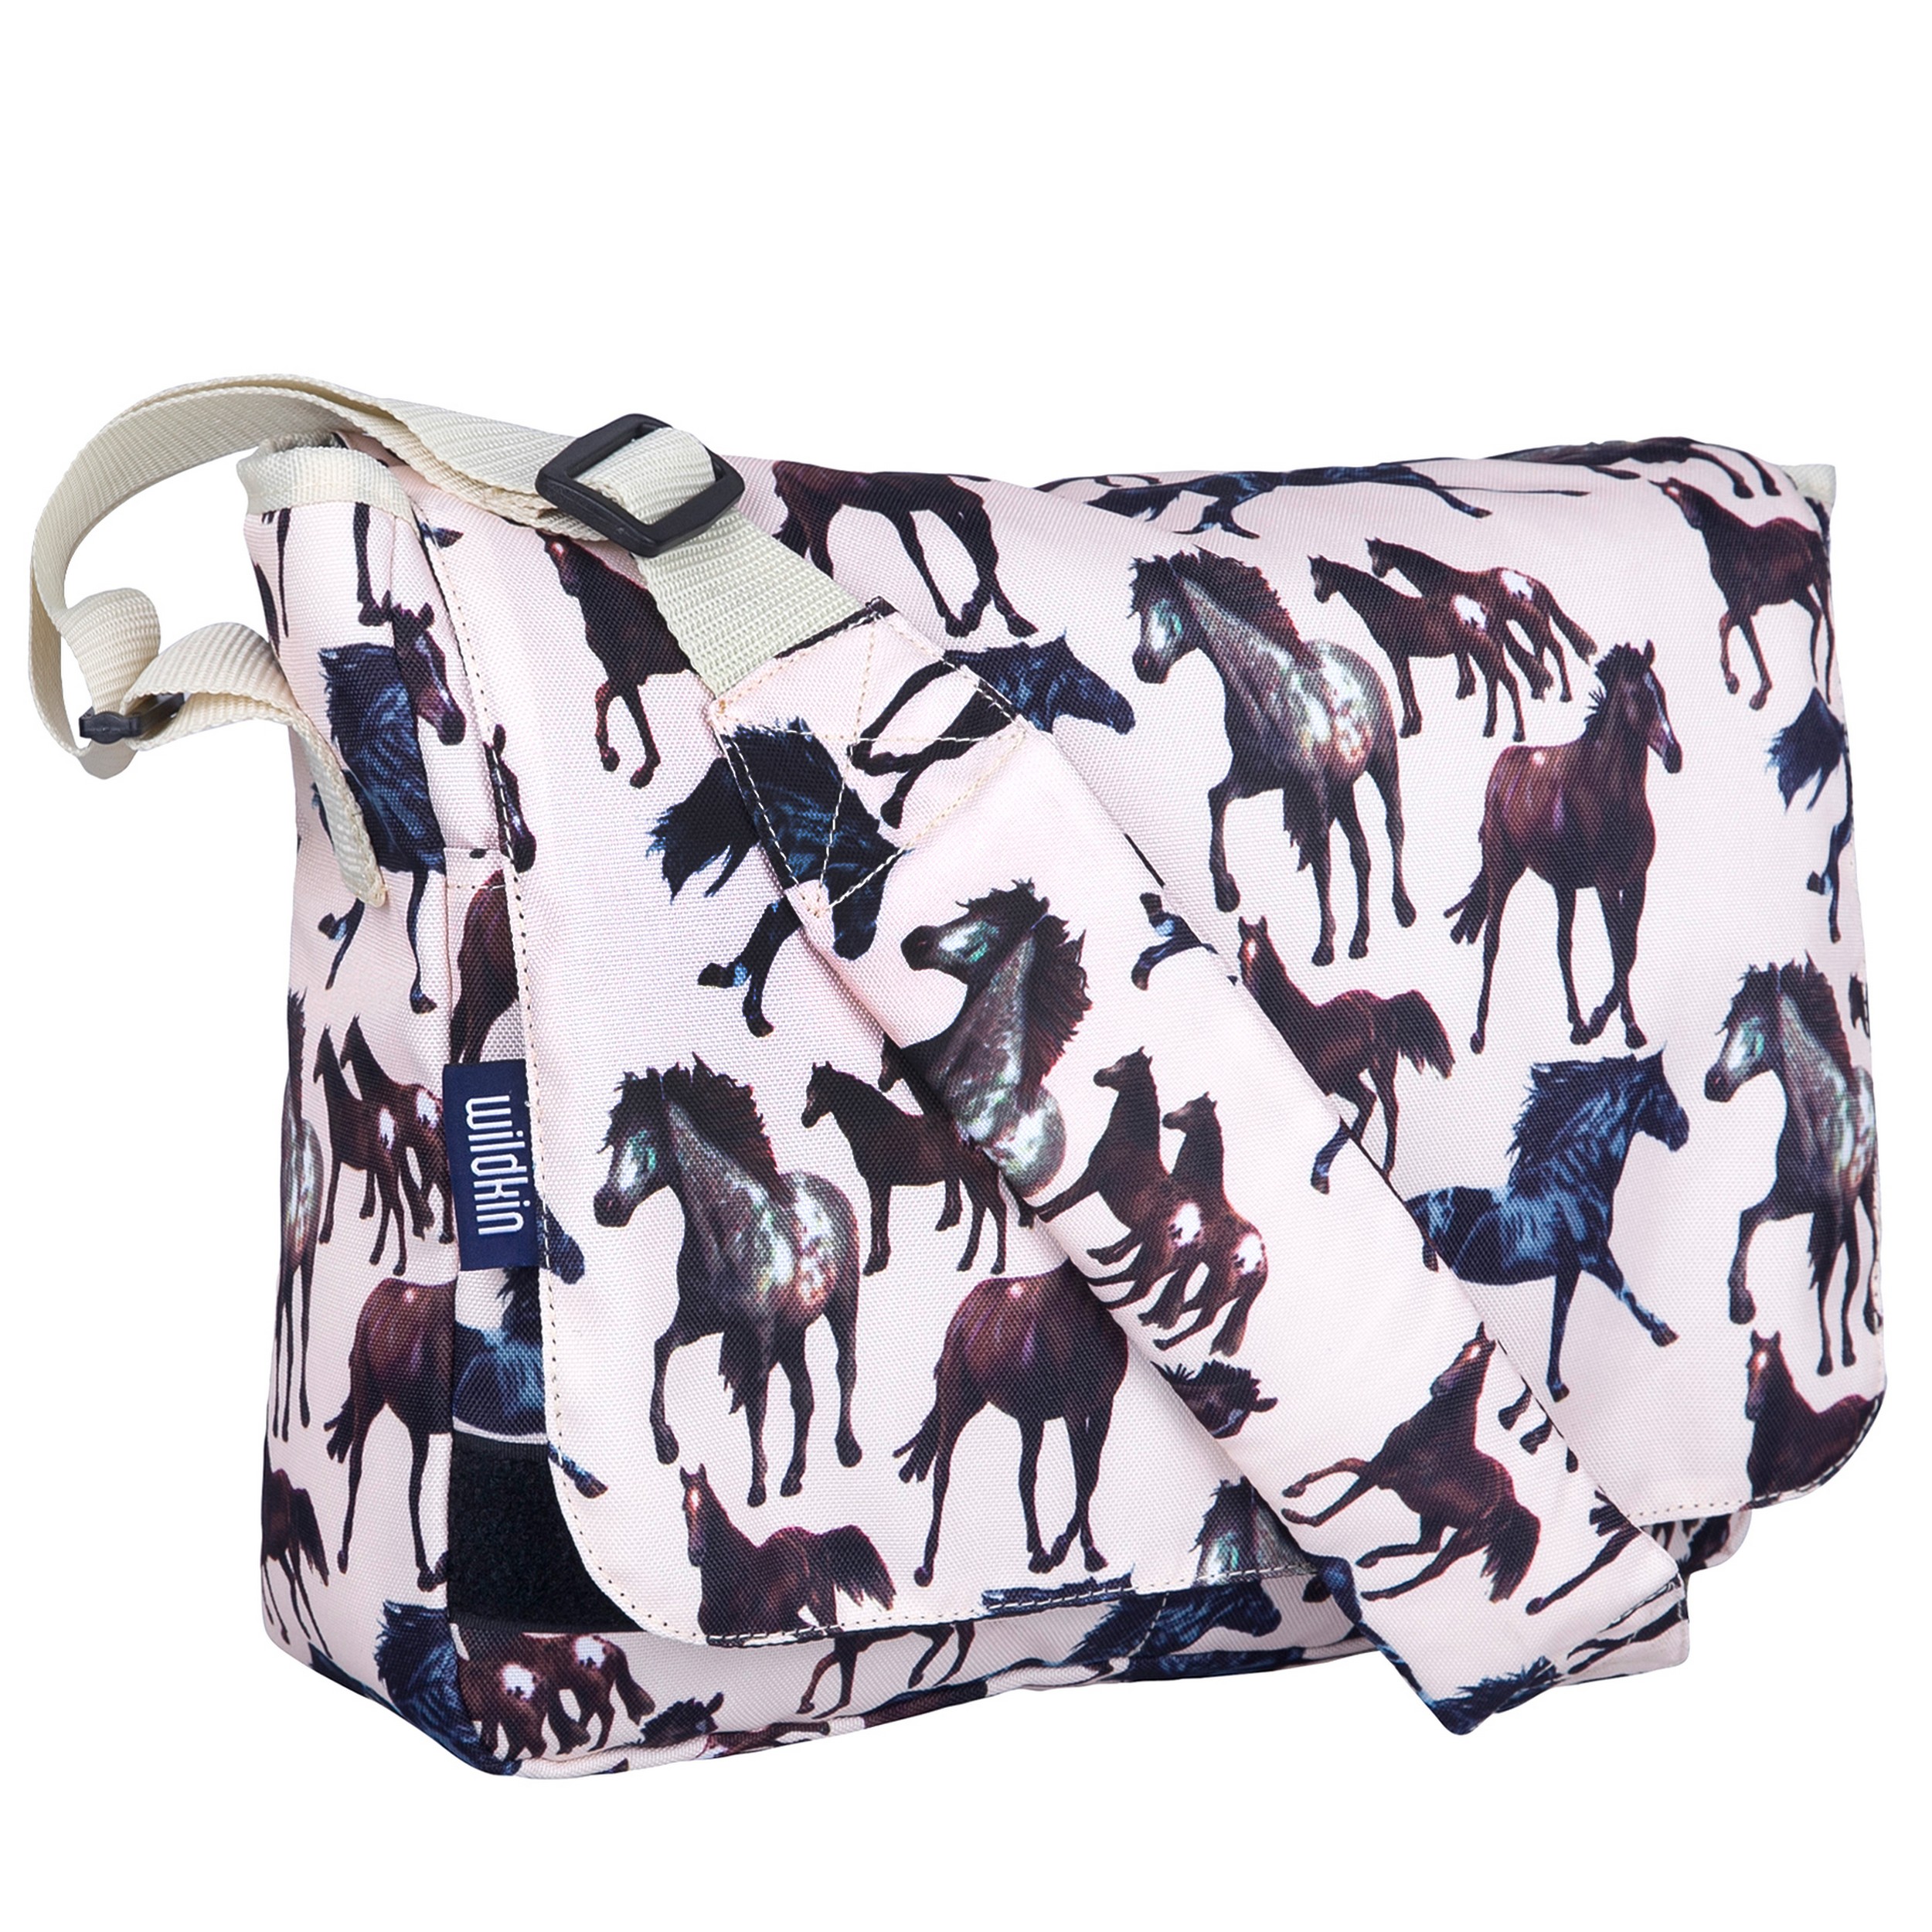 Wildkin Kids Messenger Bag for Girls, Perfect for School or Travel, 13 Inch (Horse Dreams Beige) - image 1 of 7